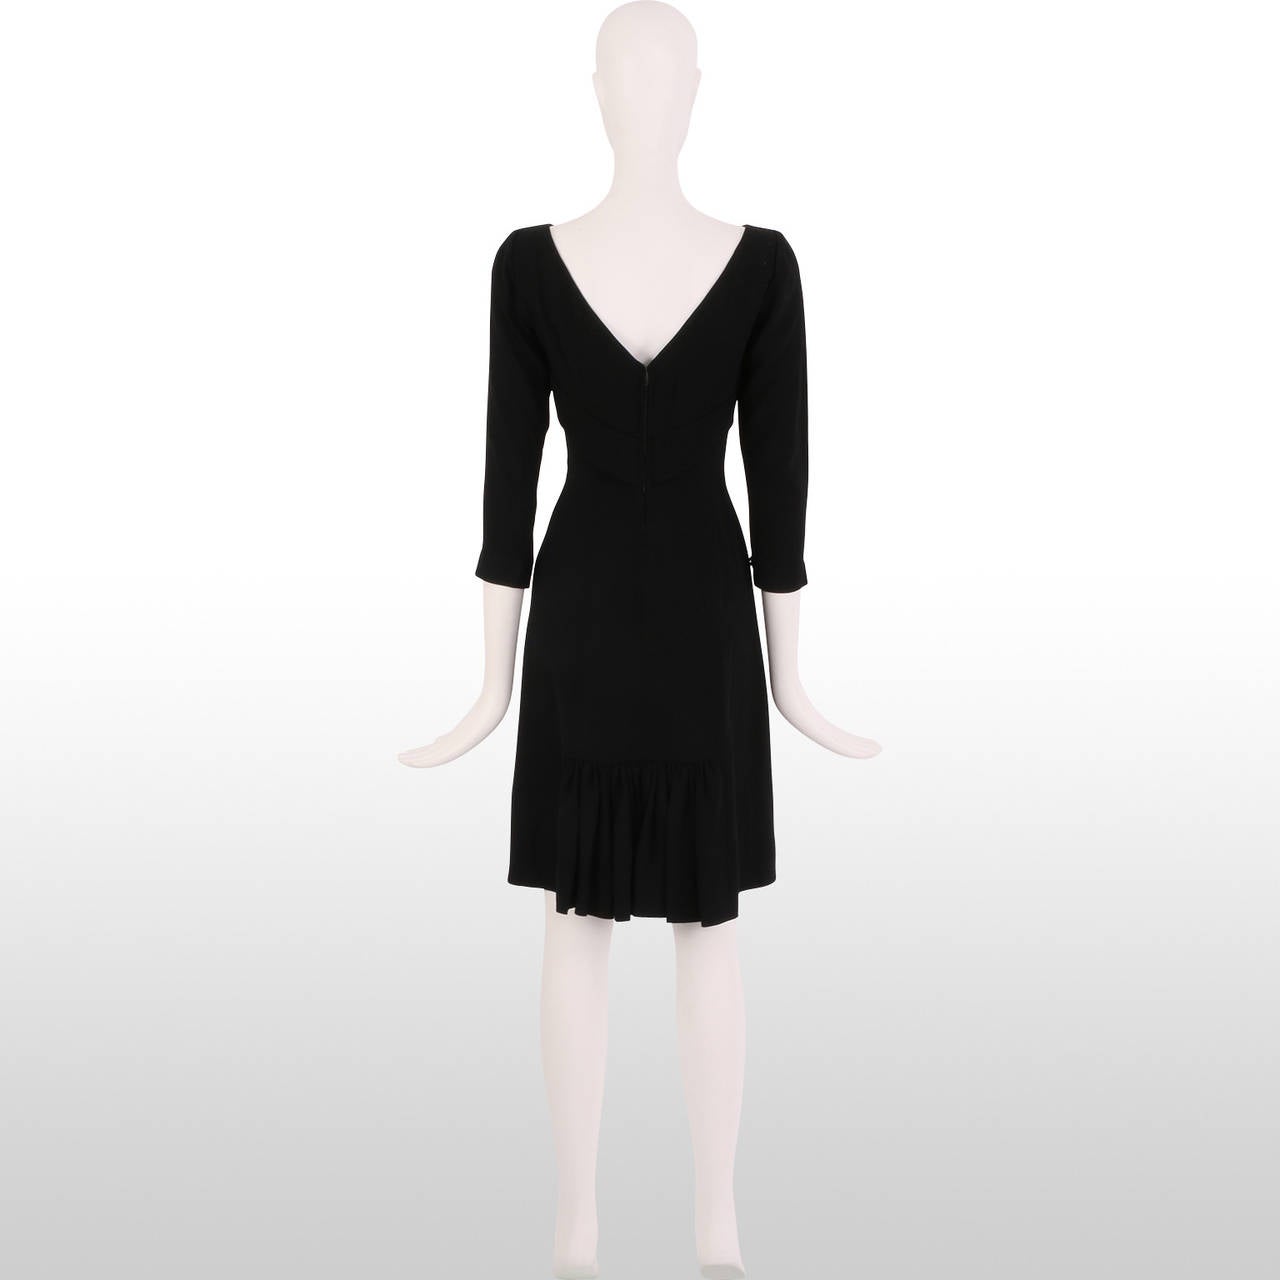 We are in love with this beautifully classic late 1940's early 1950's little black cocktail dress by Eisenberg Originals. It is made from black crepe fabric and is simplistically elegant in its shape and structure with 3/4 length sleeves, nipped